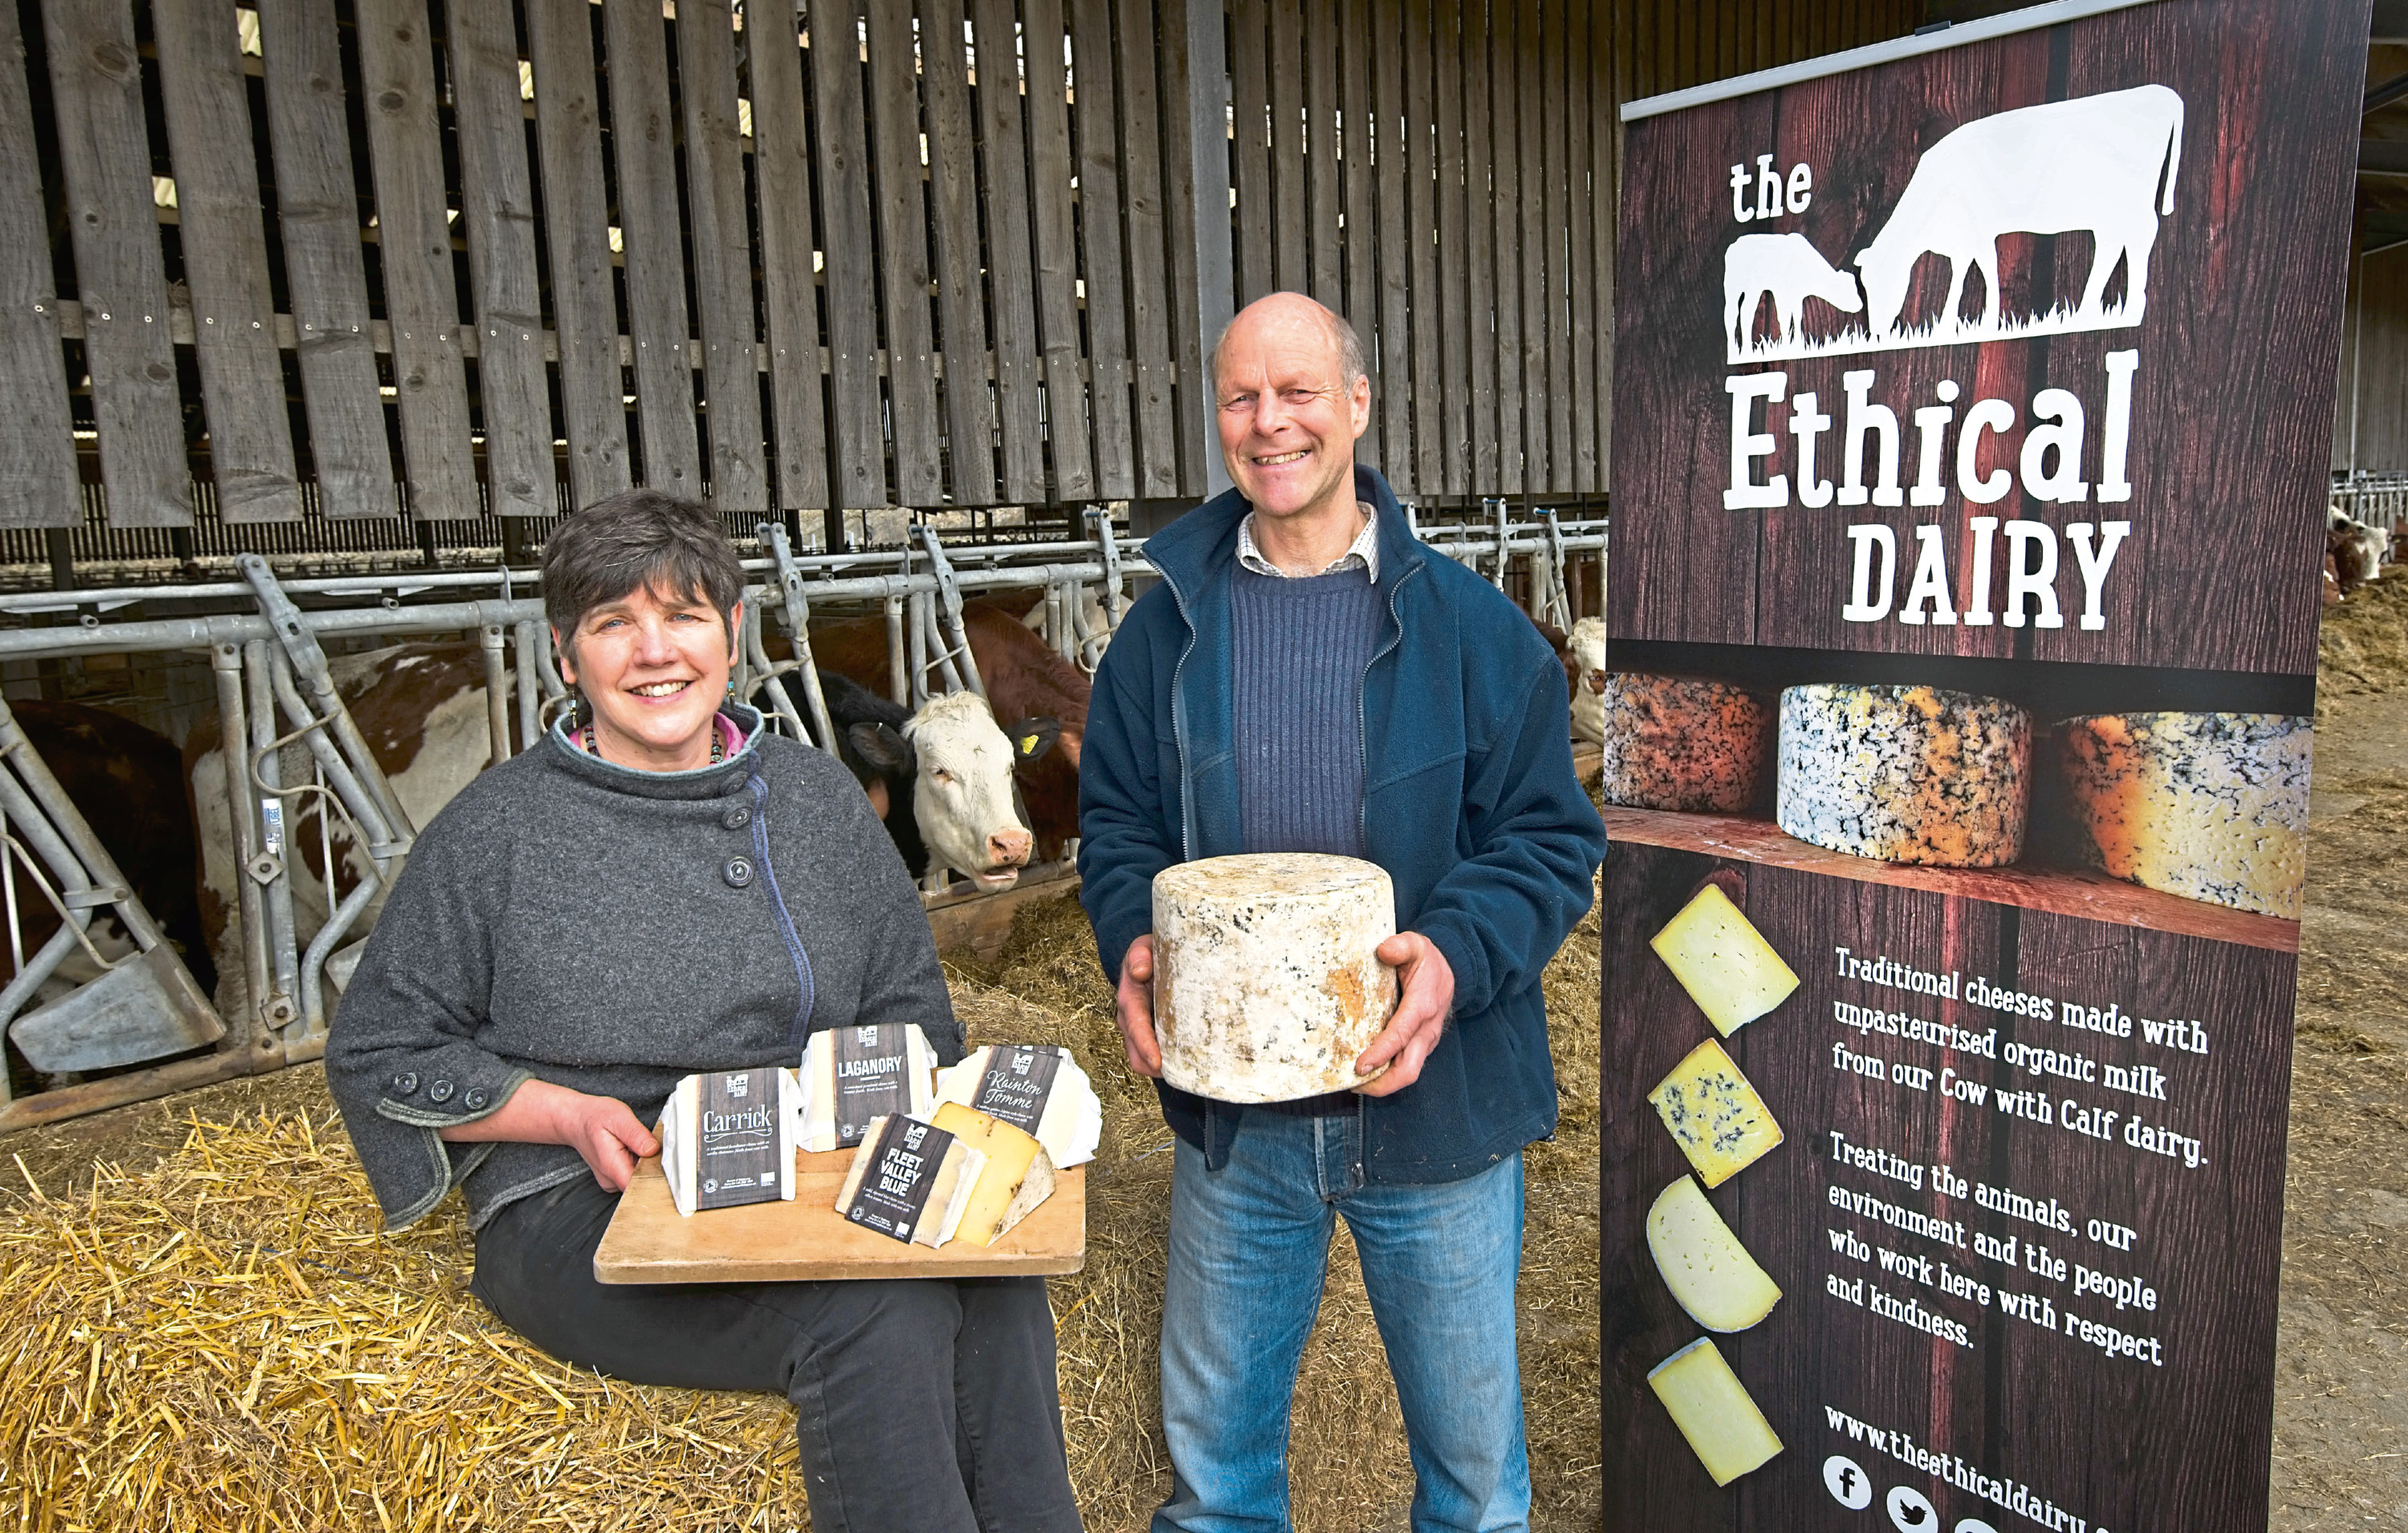 Wilma and David Finlay from The Ethical Dairy.